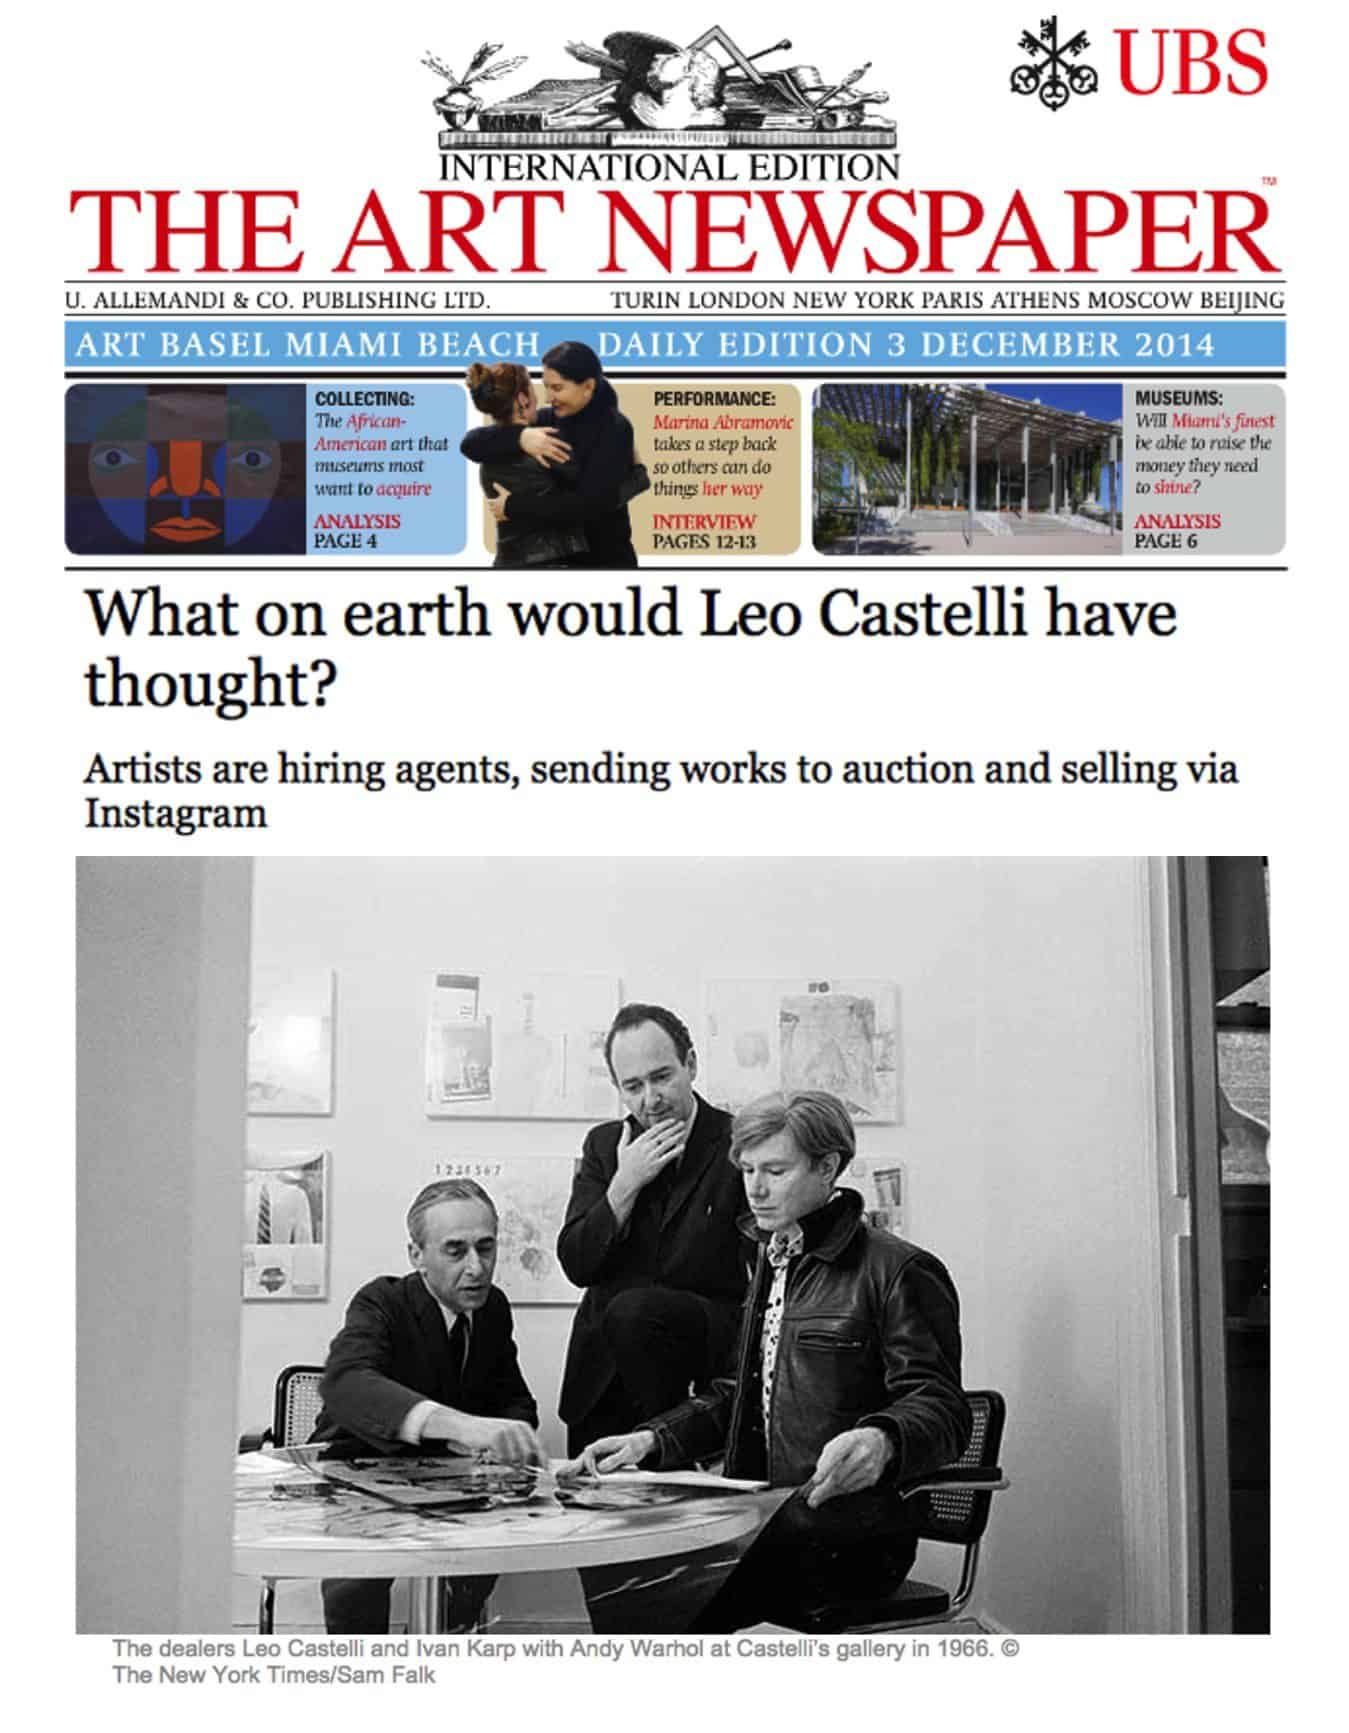 The Art Newspaper “What on earth would Leo Castelli have thought?”